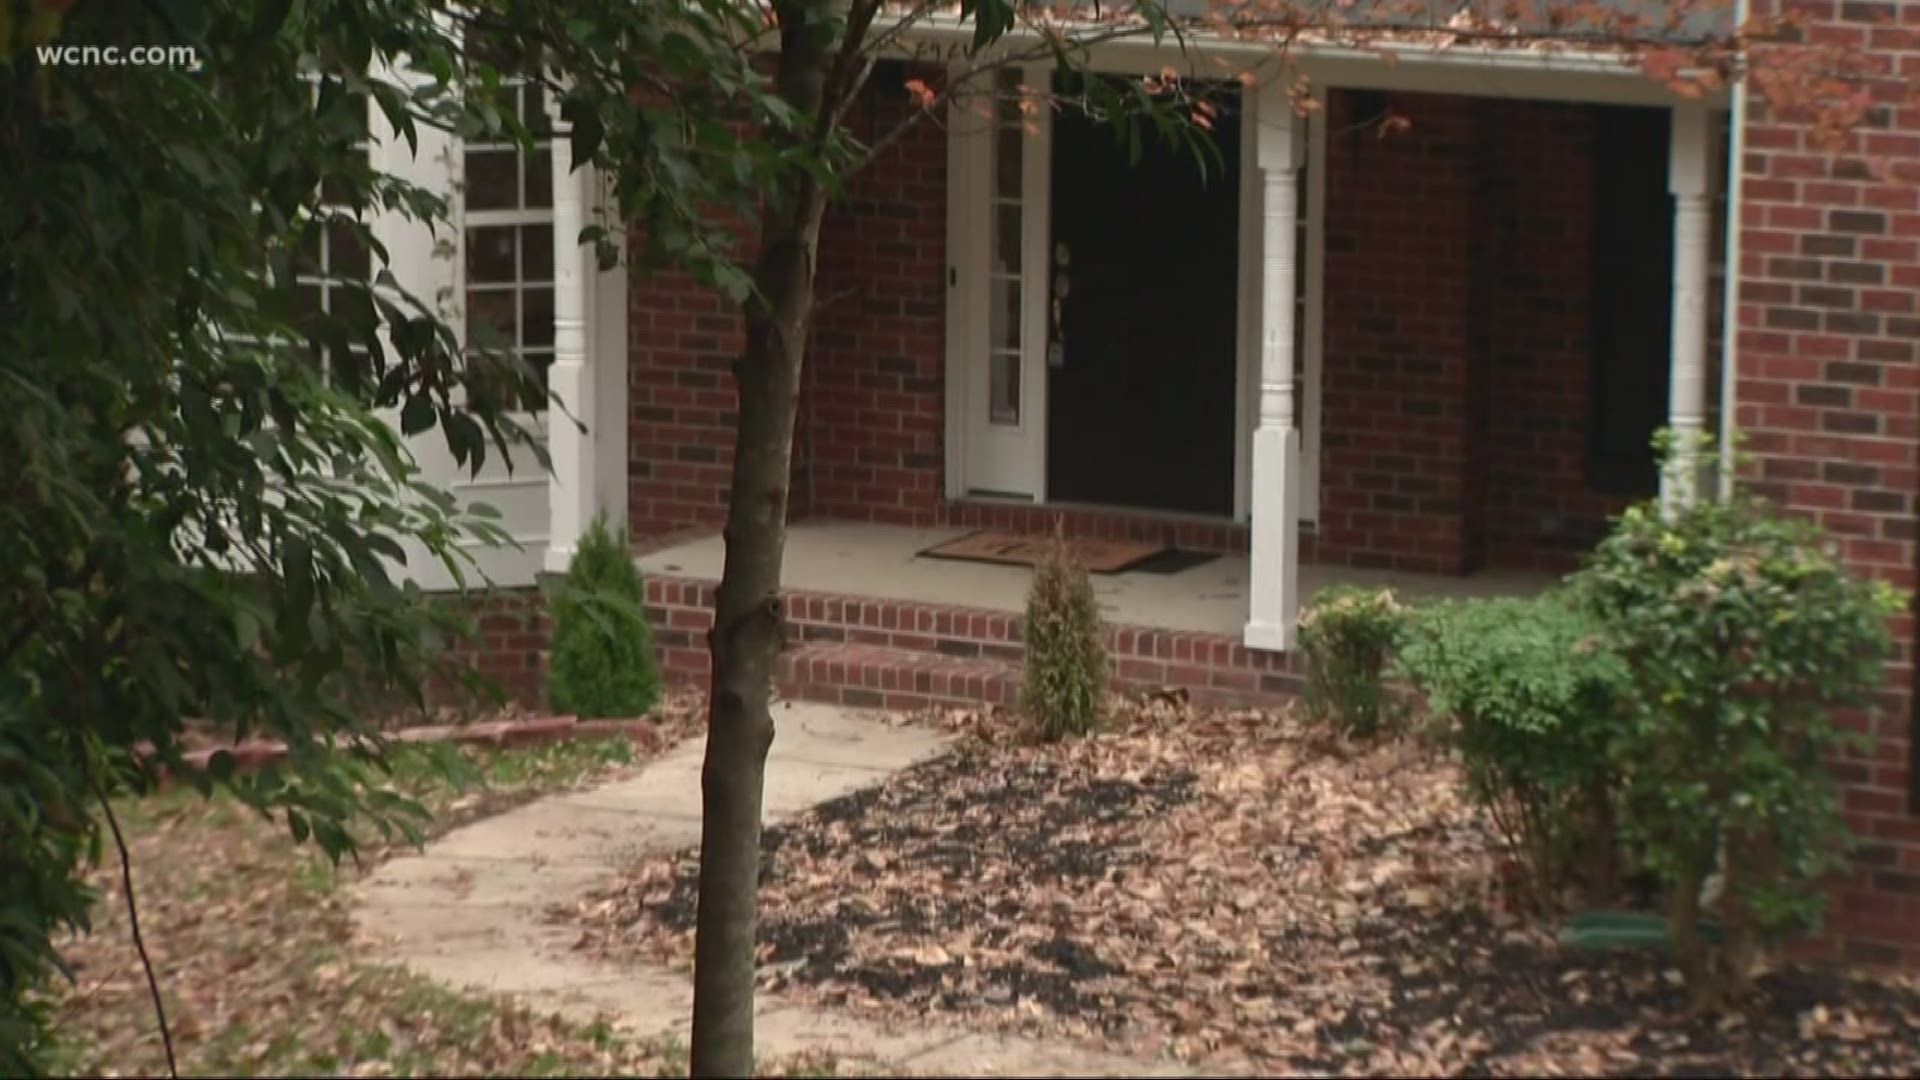 An officer spotted more than 12 juveniles inside a Myers Park home during a break-in. Now, several teenagers are facing charges in connection.